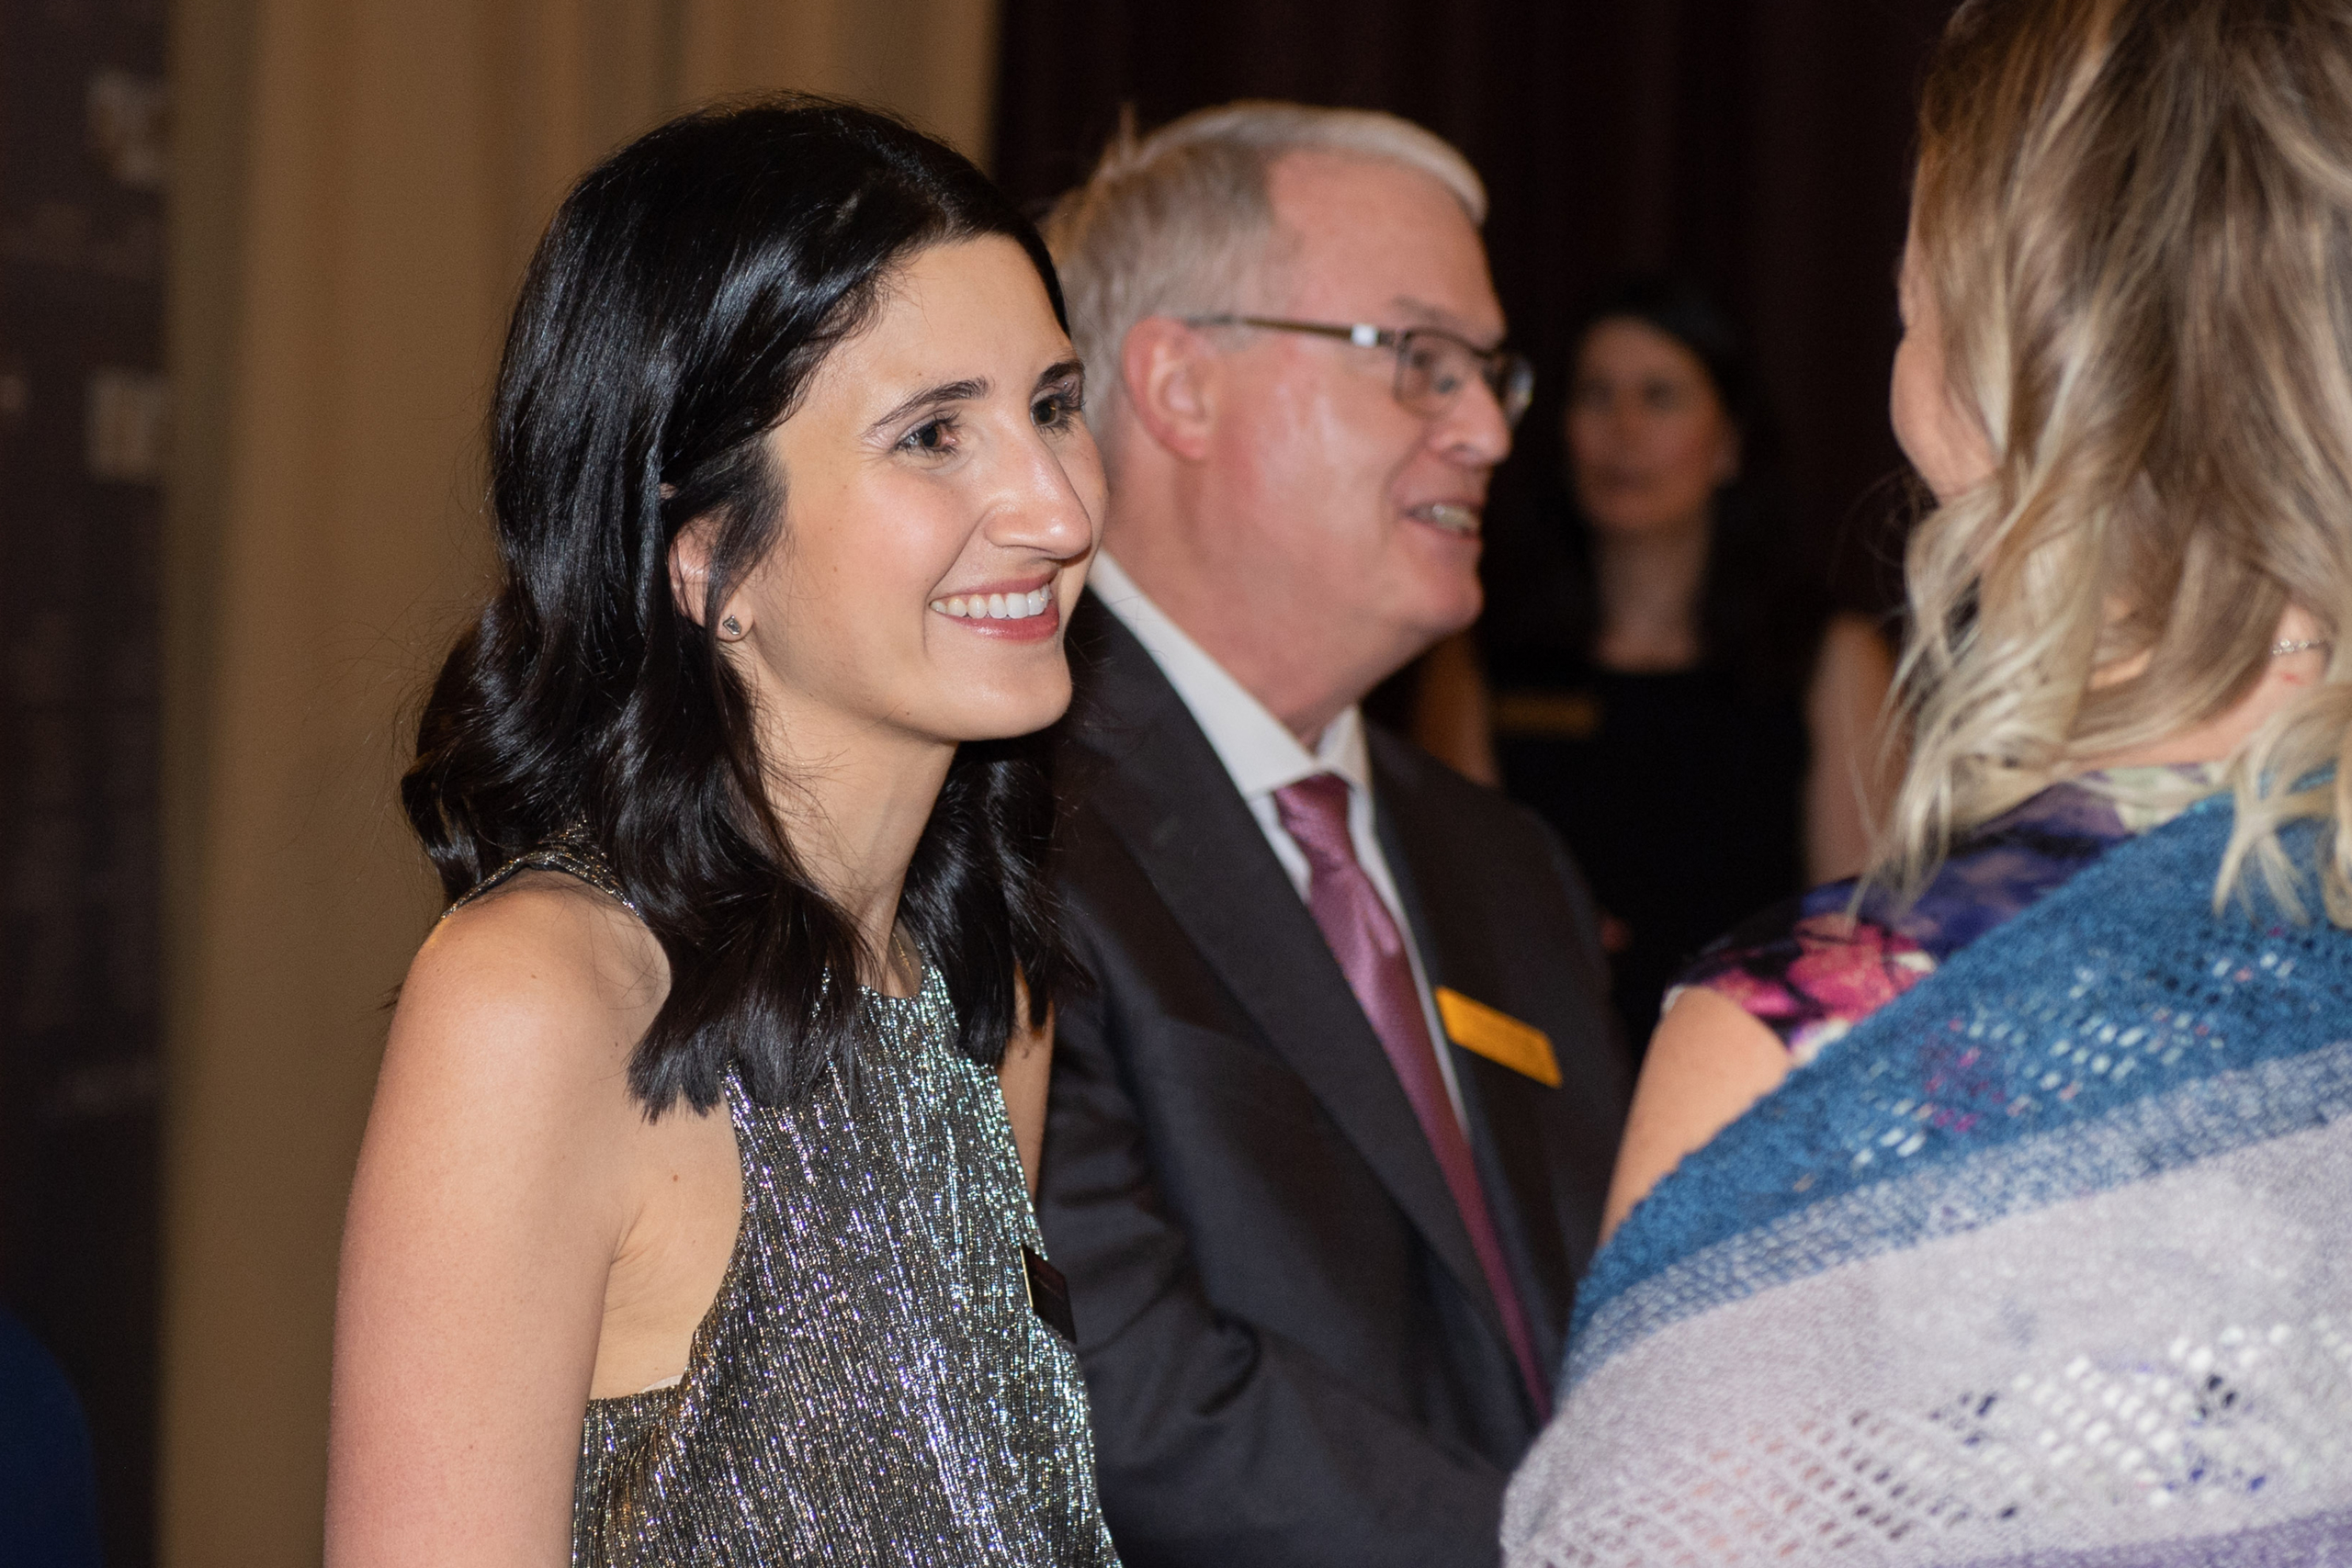 Lauren Landau speaks with a guest at the Burgundy Ball, with Richard Rooney beside her